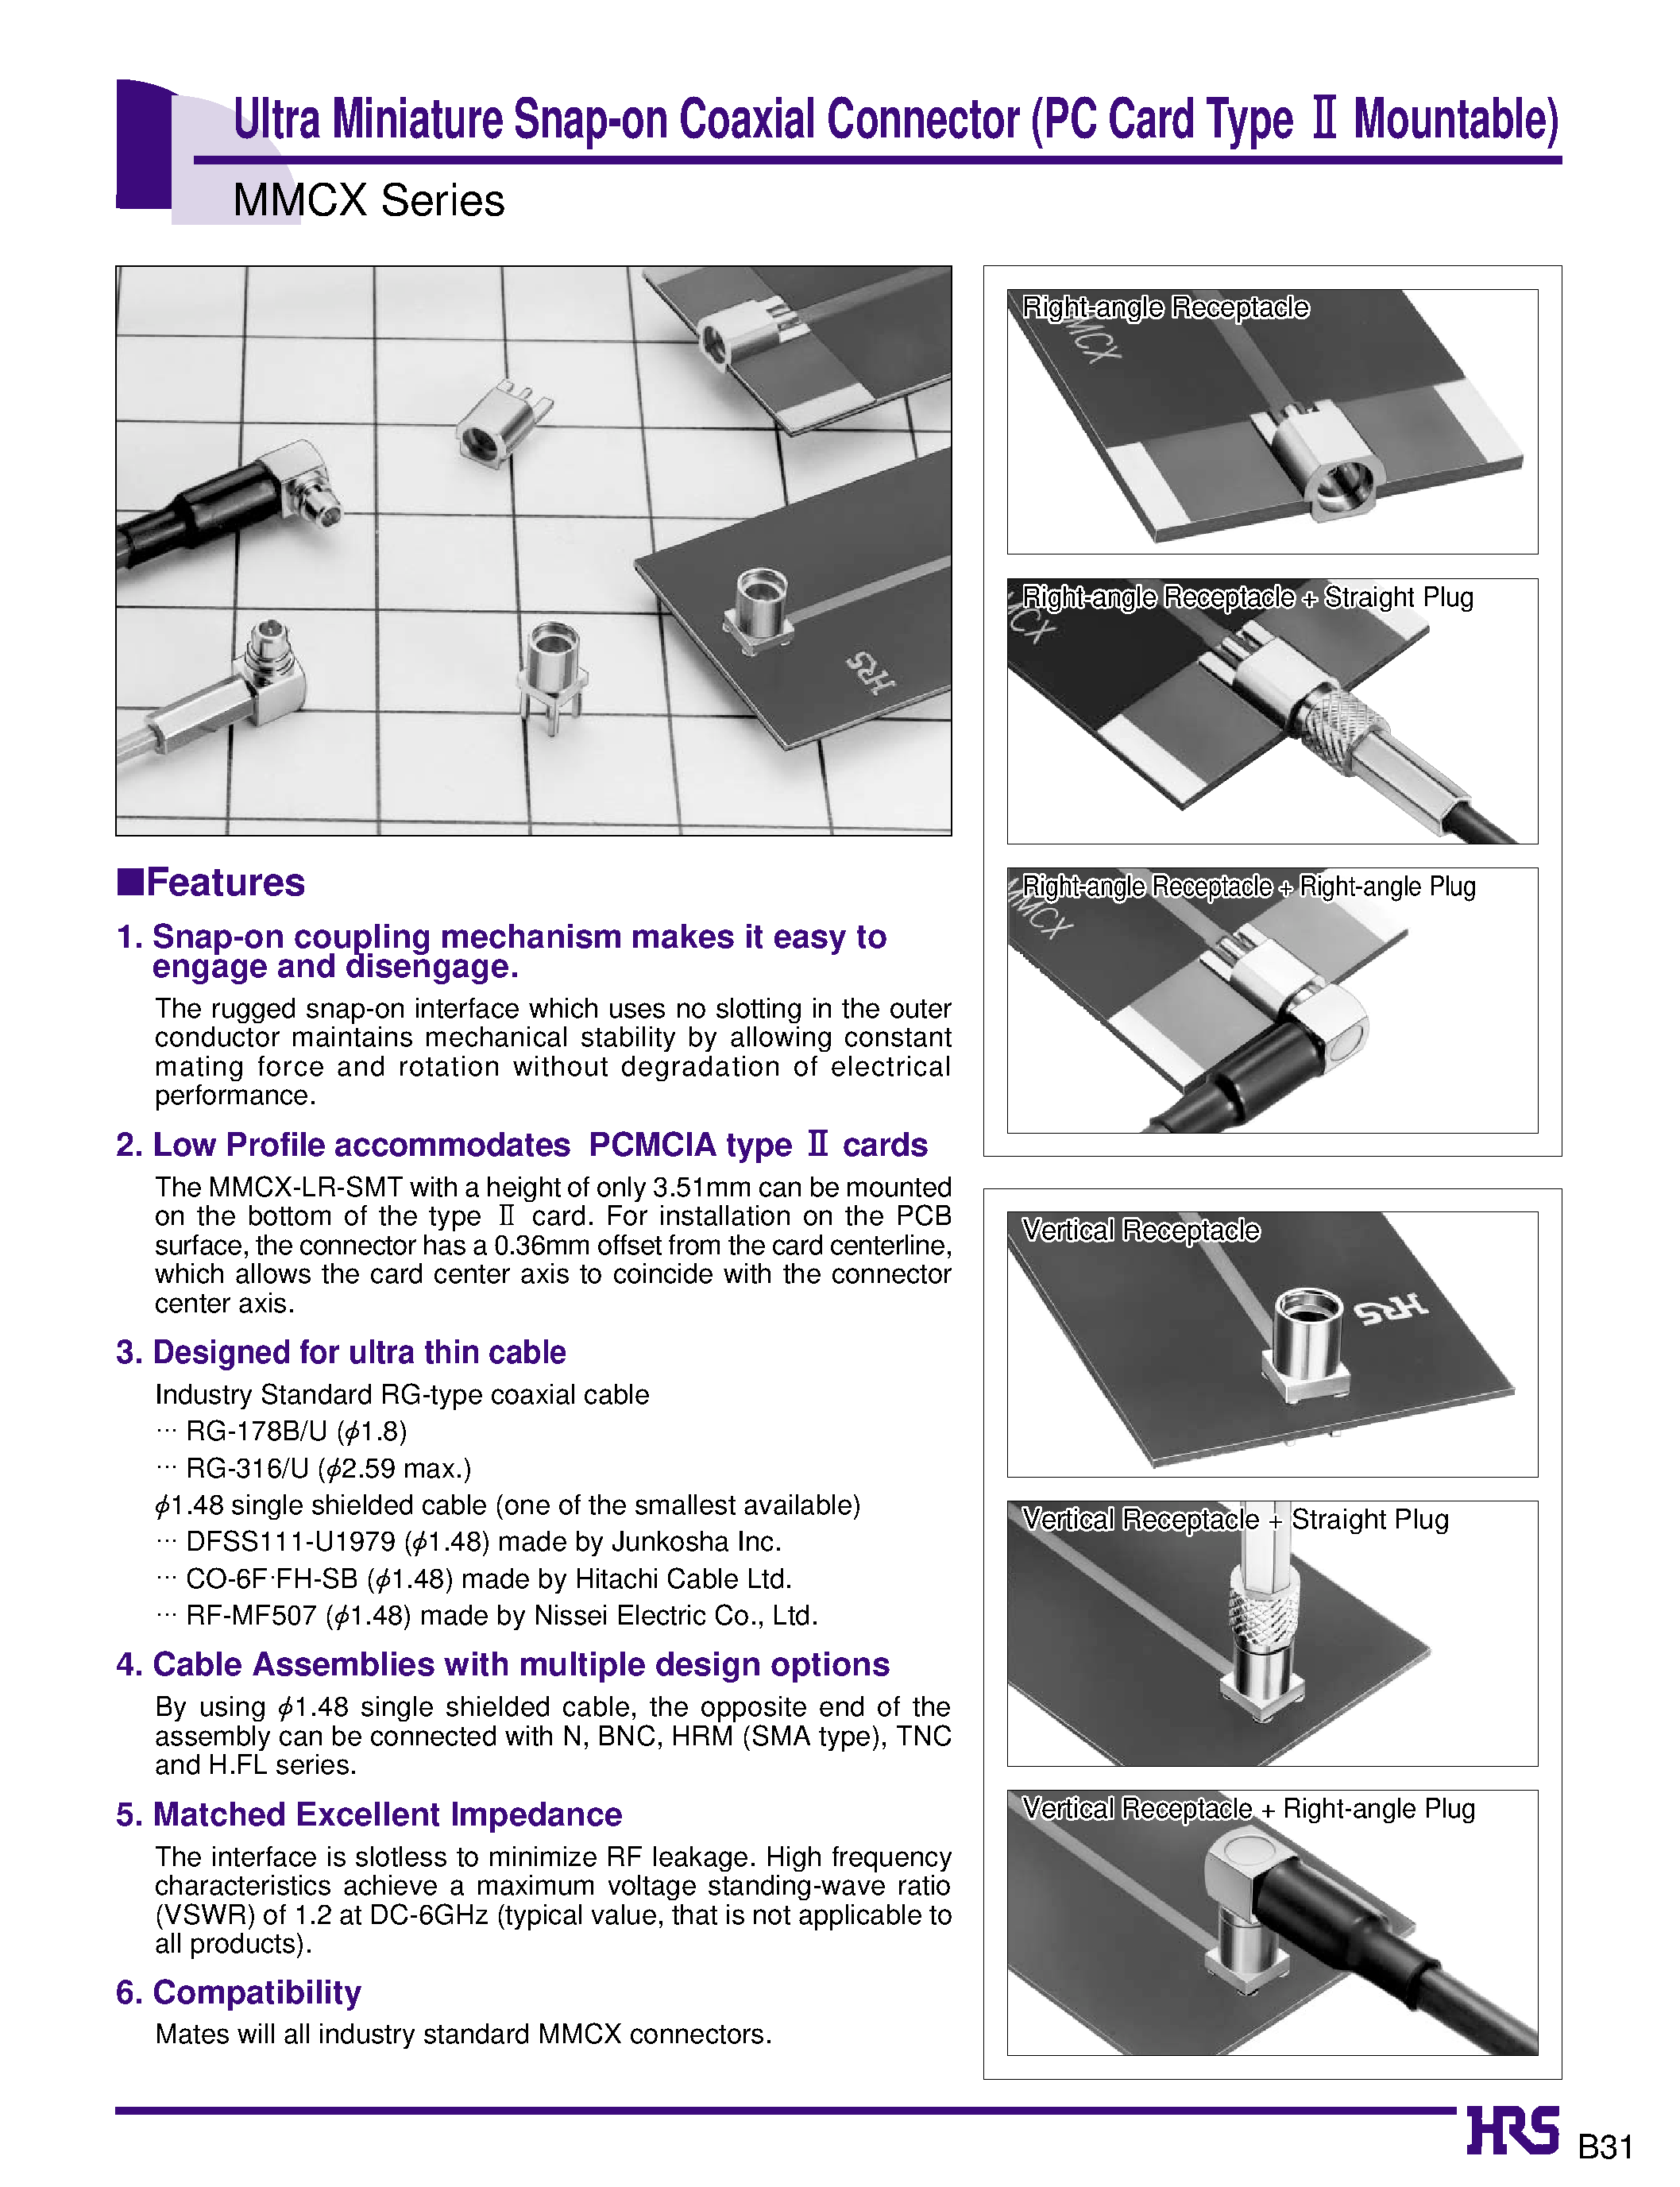 Datasheet MMCX-P-178B/U - Ultra Miniature Snap-on Coaxial Connector (PC Card Type 2 Mountable) page 1